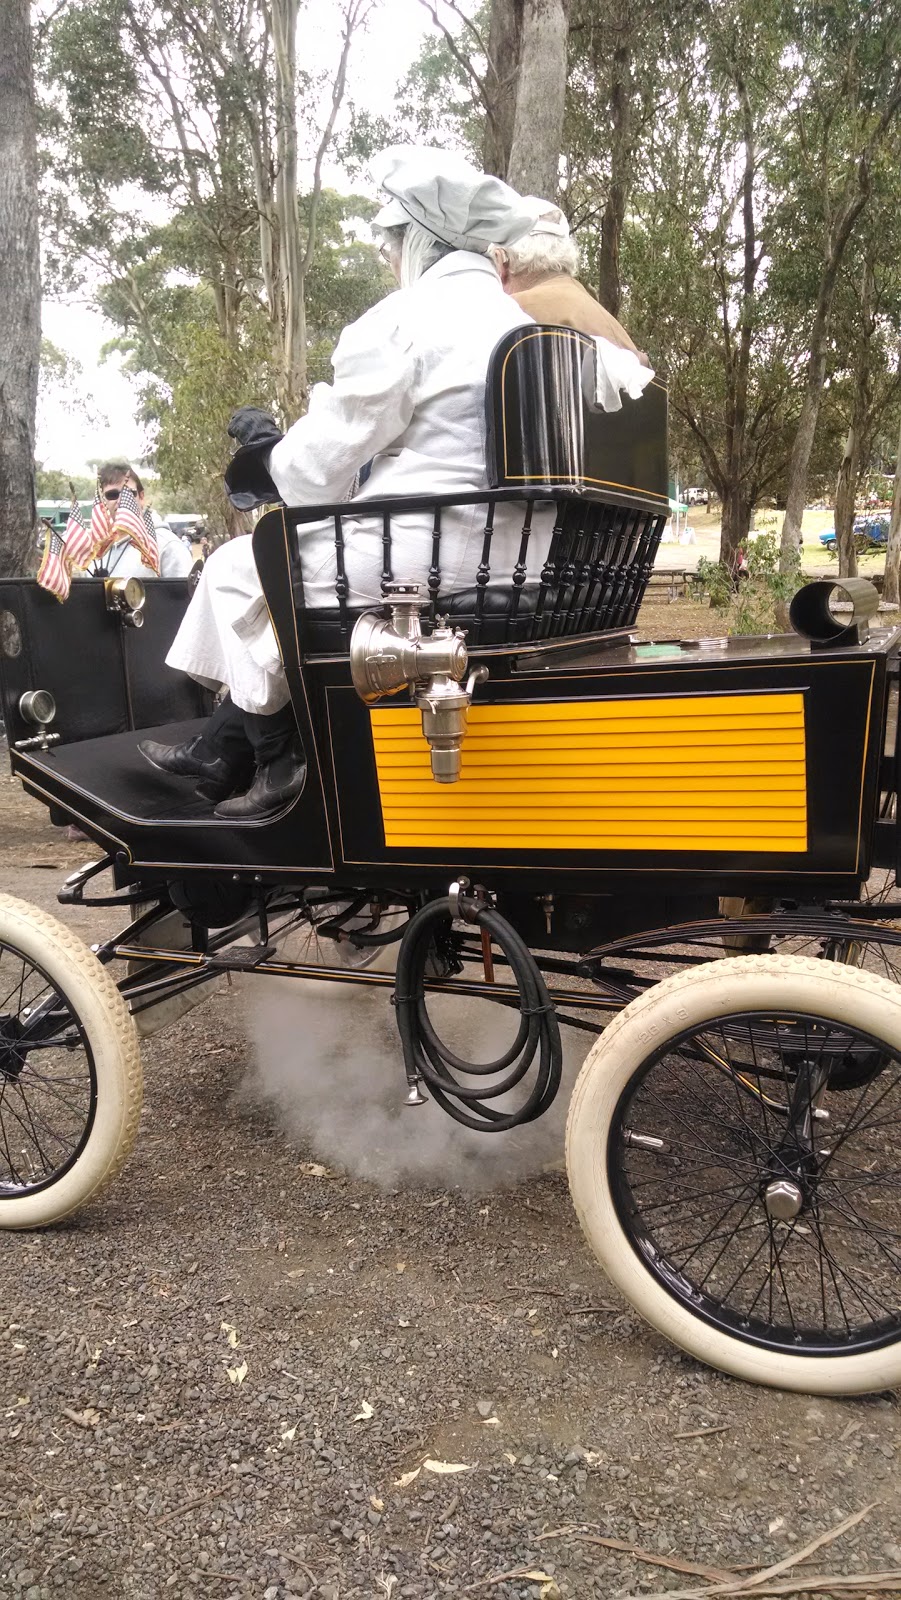 The Campbelltown Steam & Machinery Museum | museum | 86 Menangle Rd, Menangle Park NSW 2563, Australia | 0417215513 OR +61 417 215 513